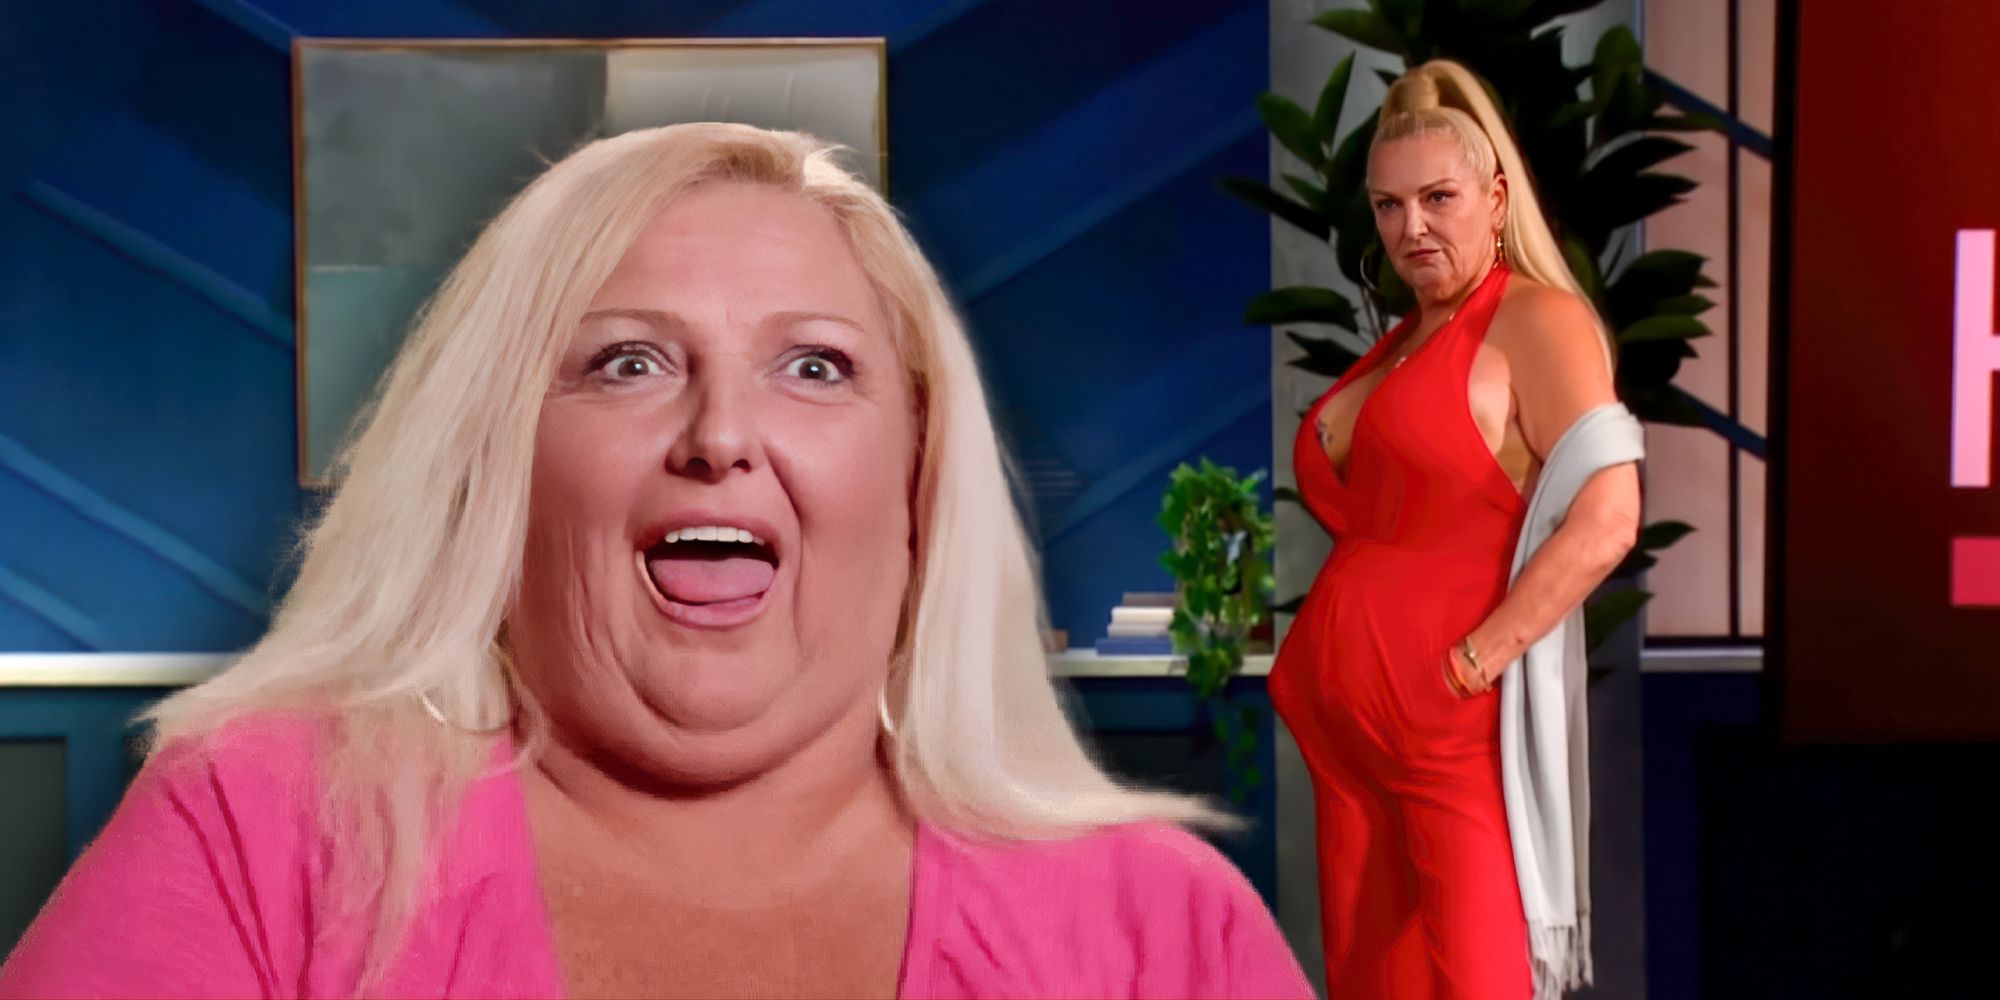 90 Day Fiancé’s Angela Deem with a surprised face and wearing a jumpsuit